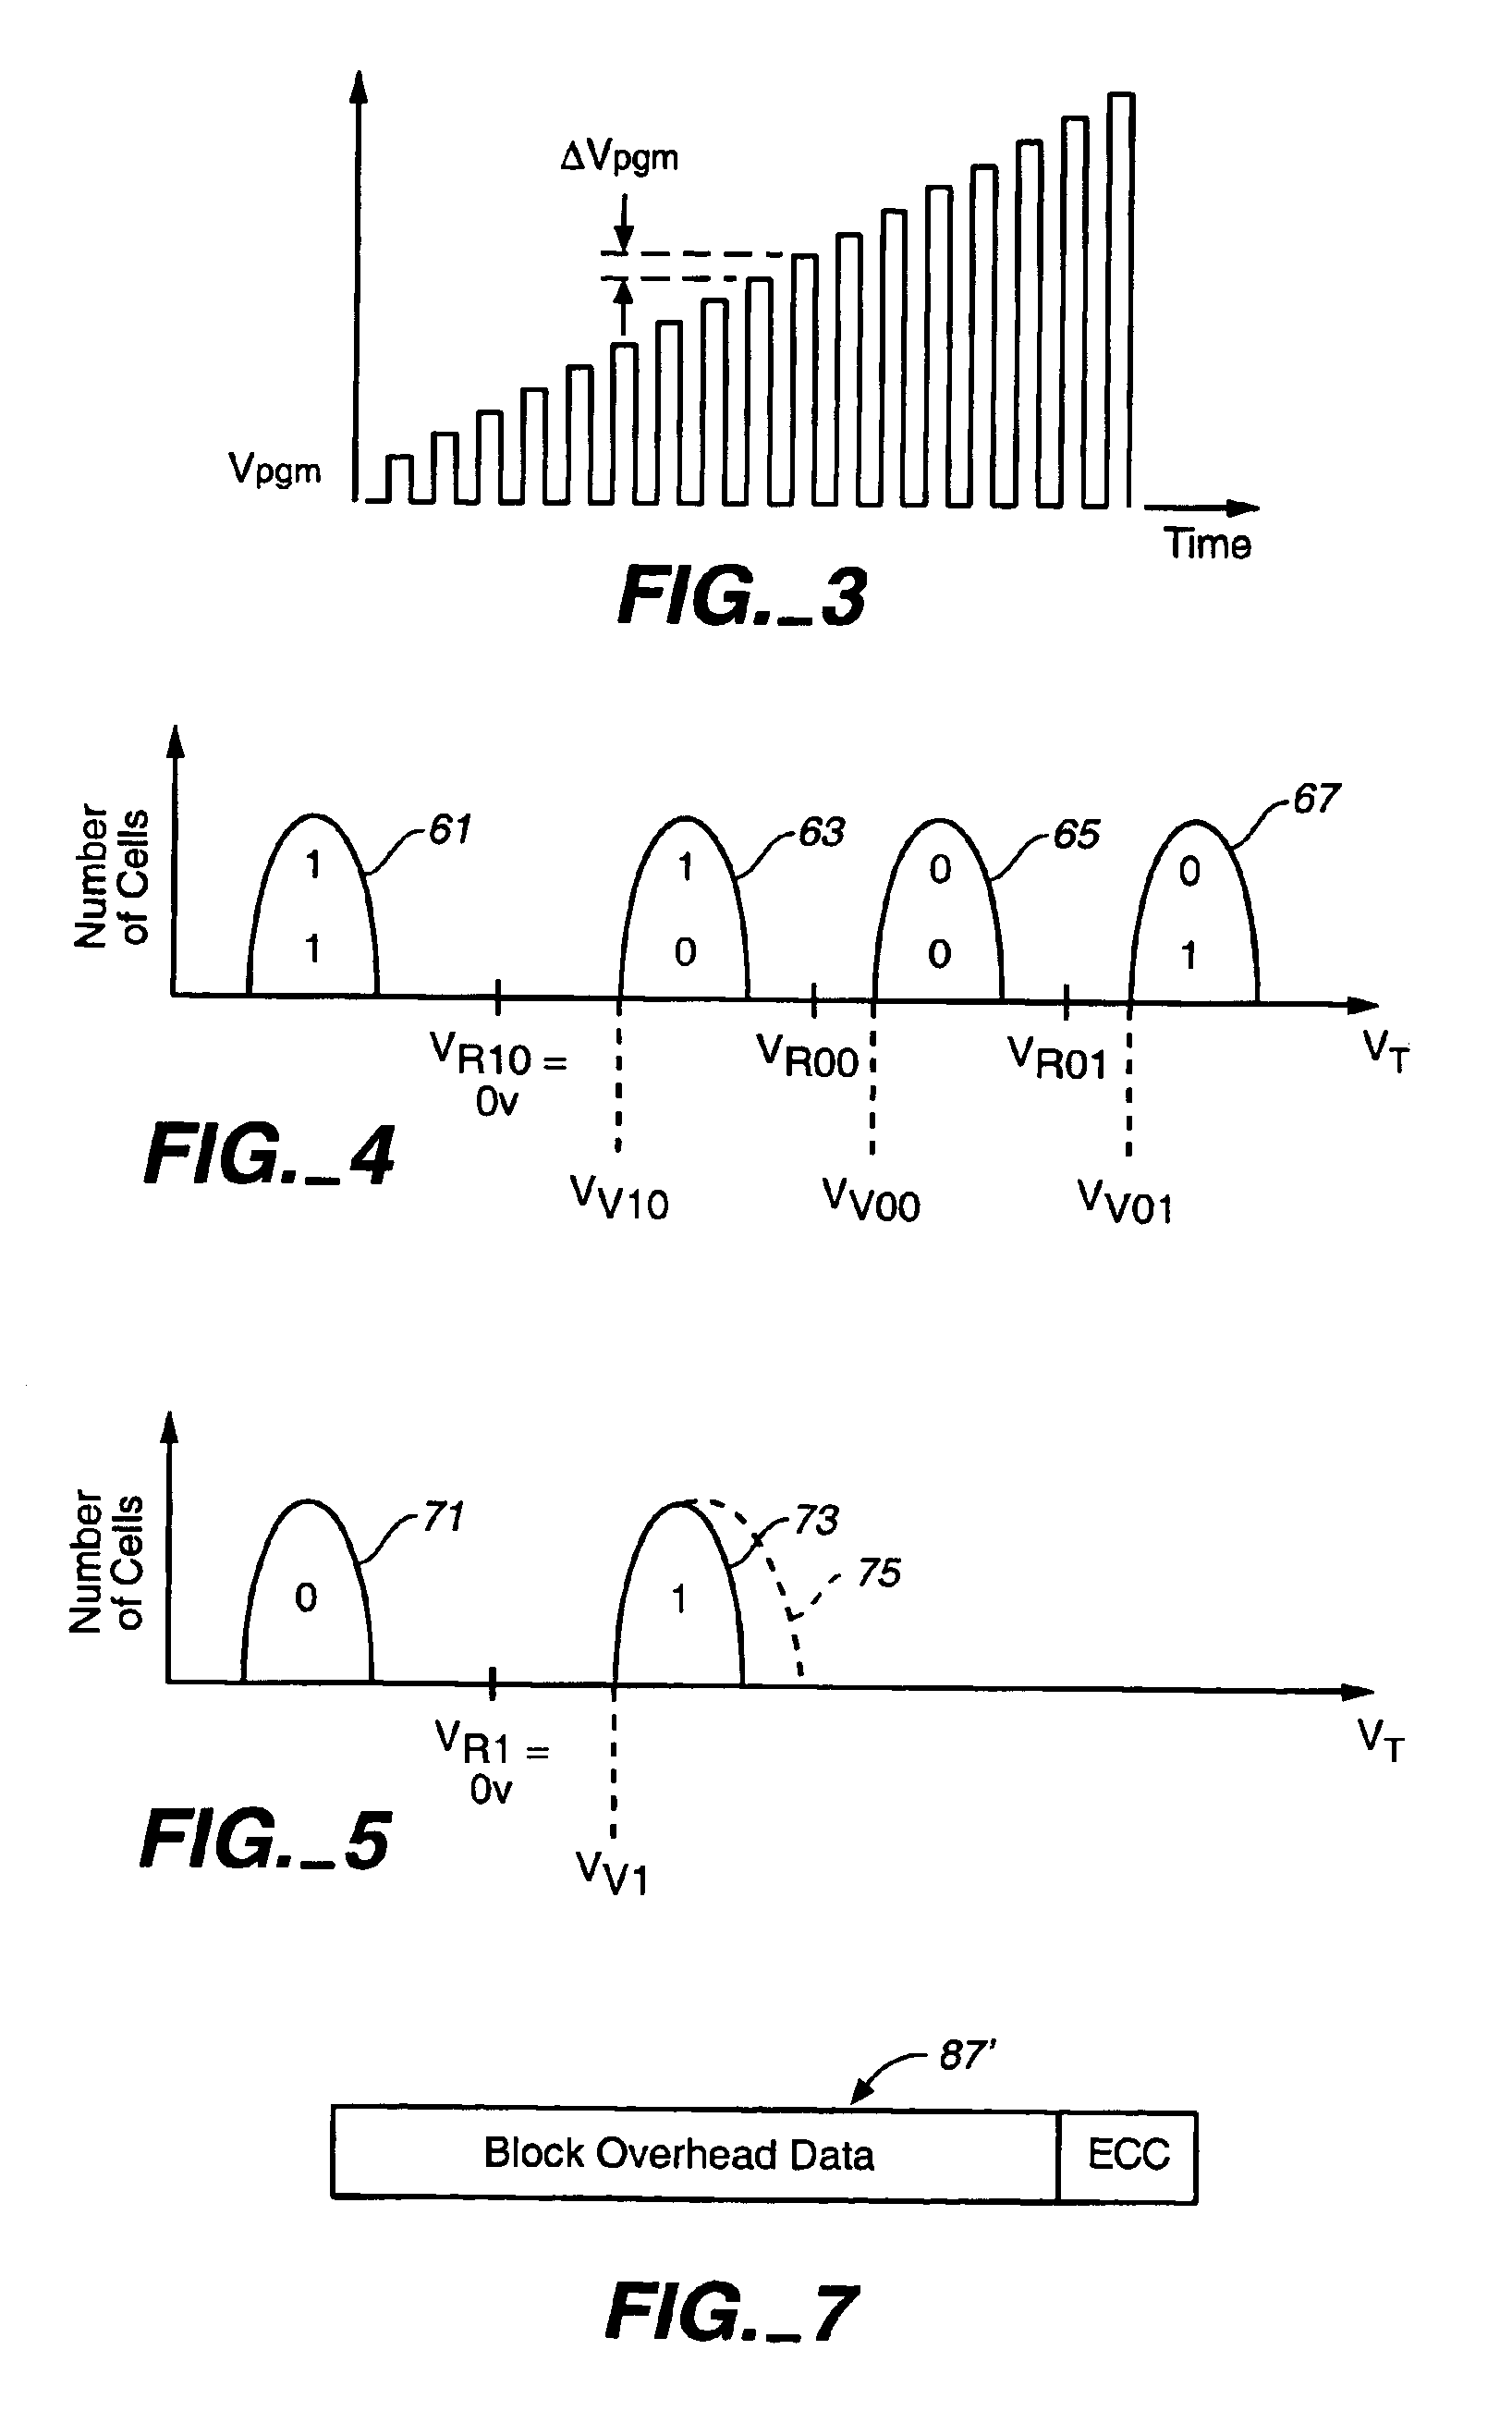 Non-volatile semiconductor memory with large erase blocks storing cycle counts